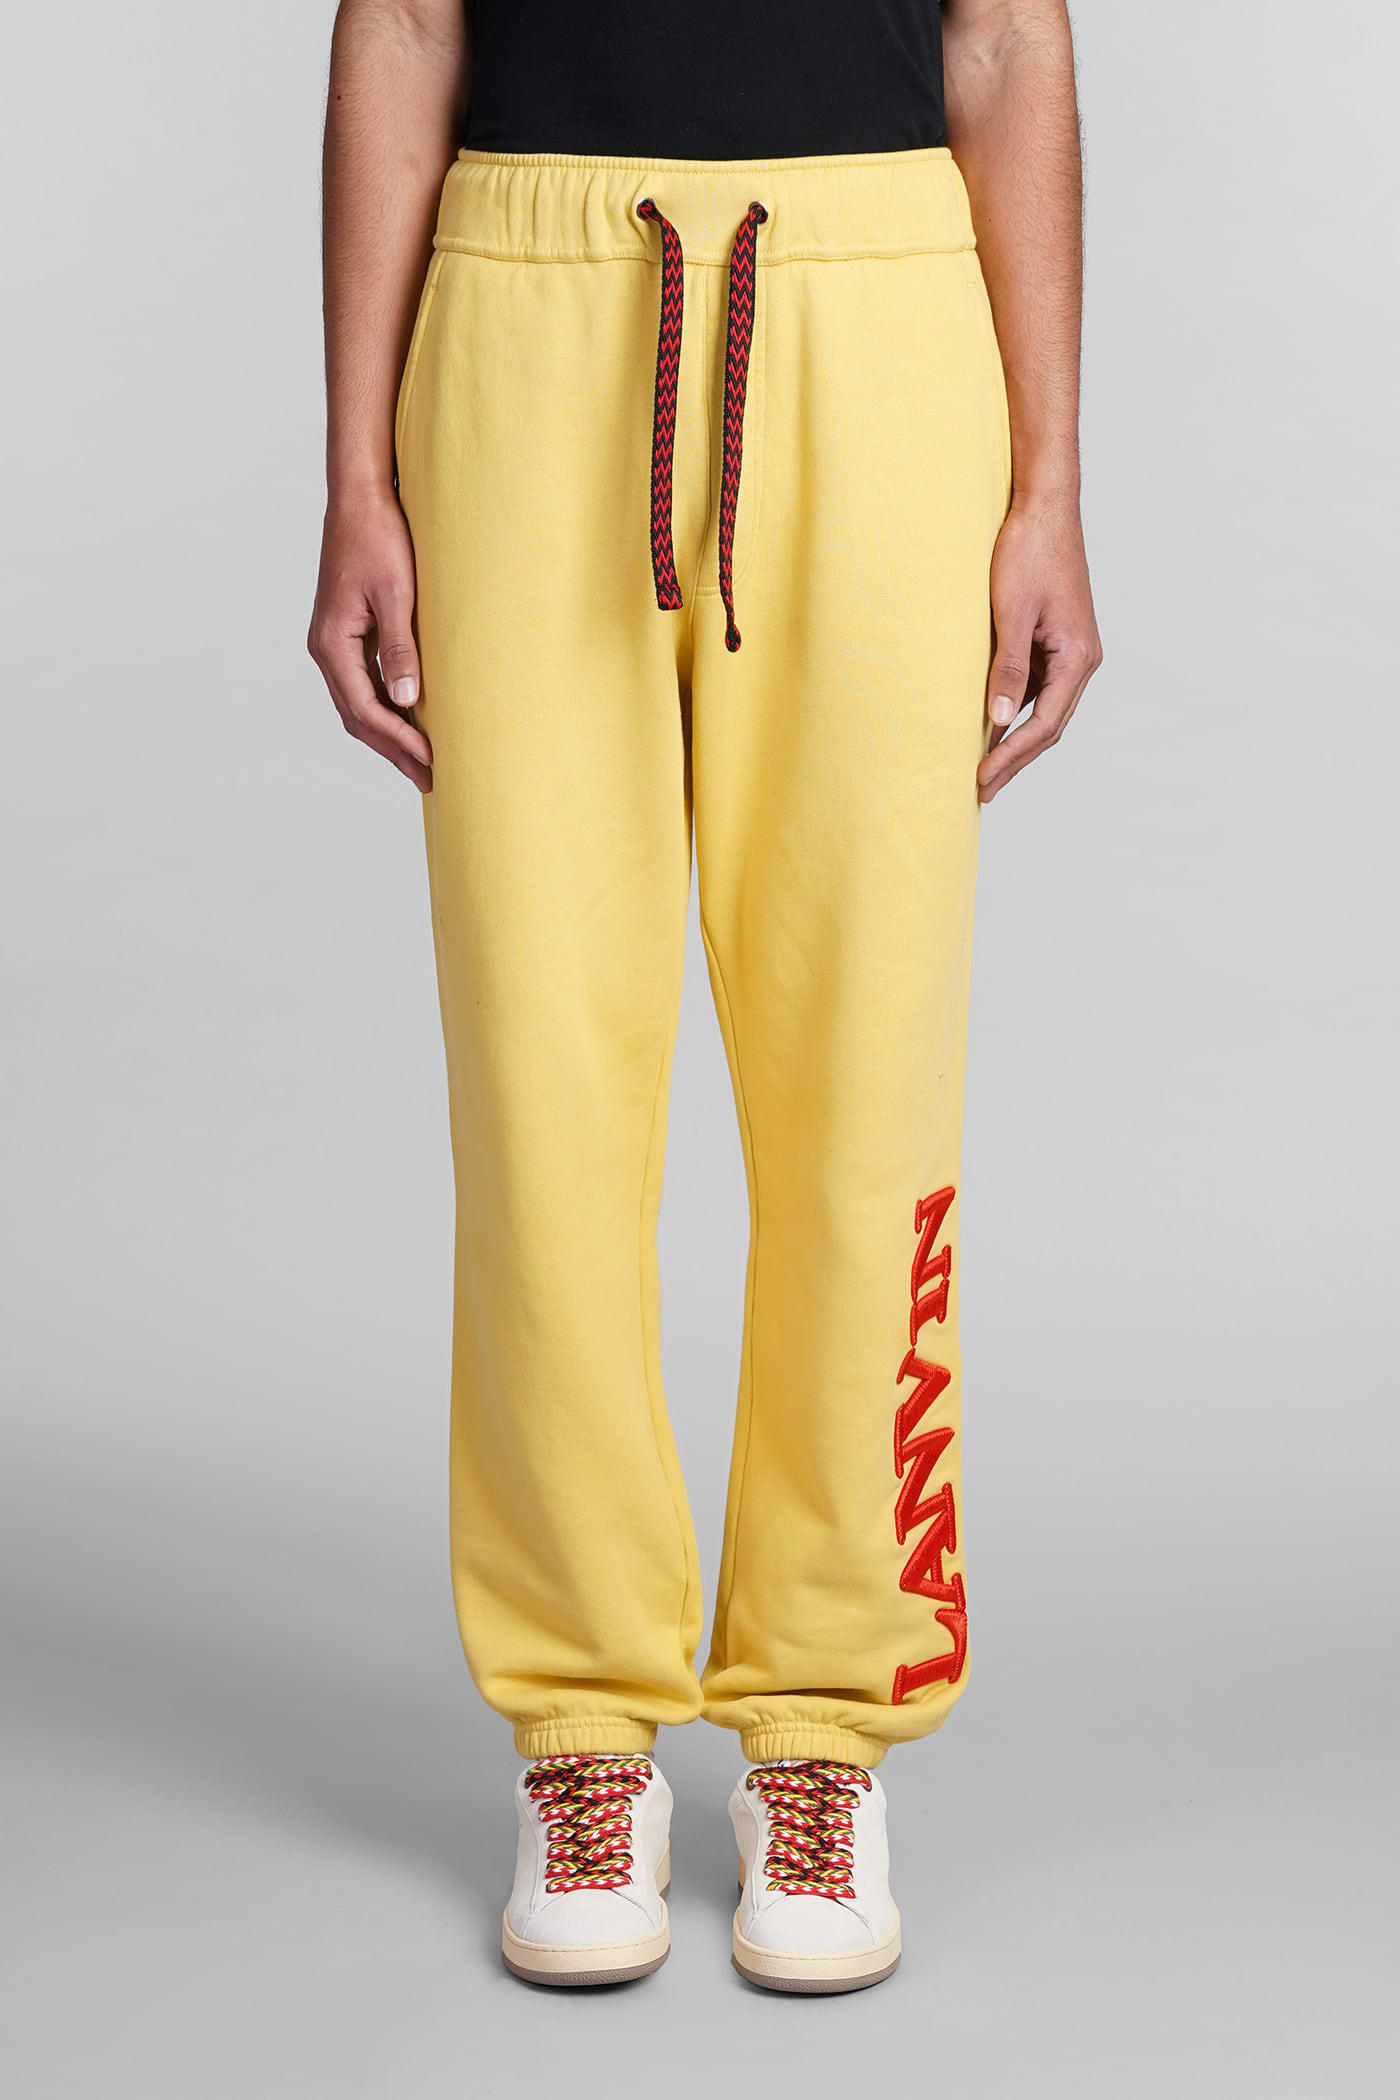 LANVIN trousers IN YELLOW COTTON